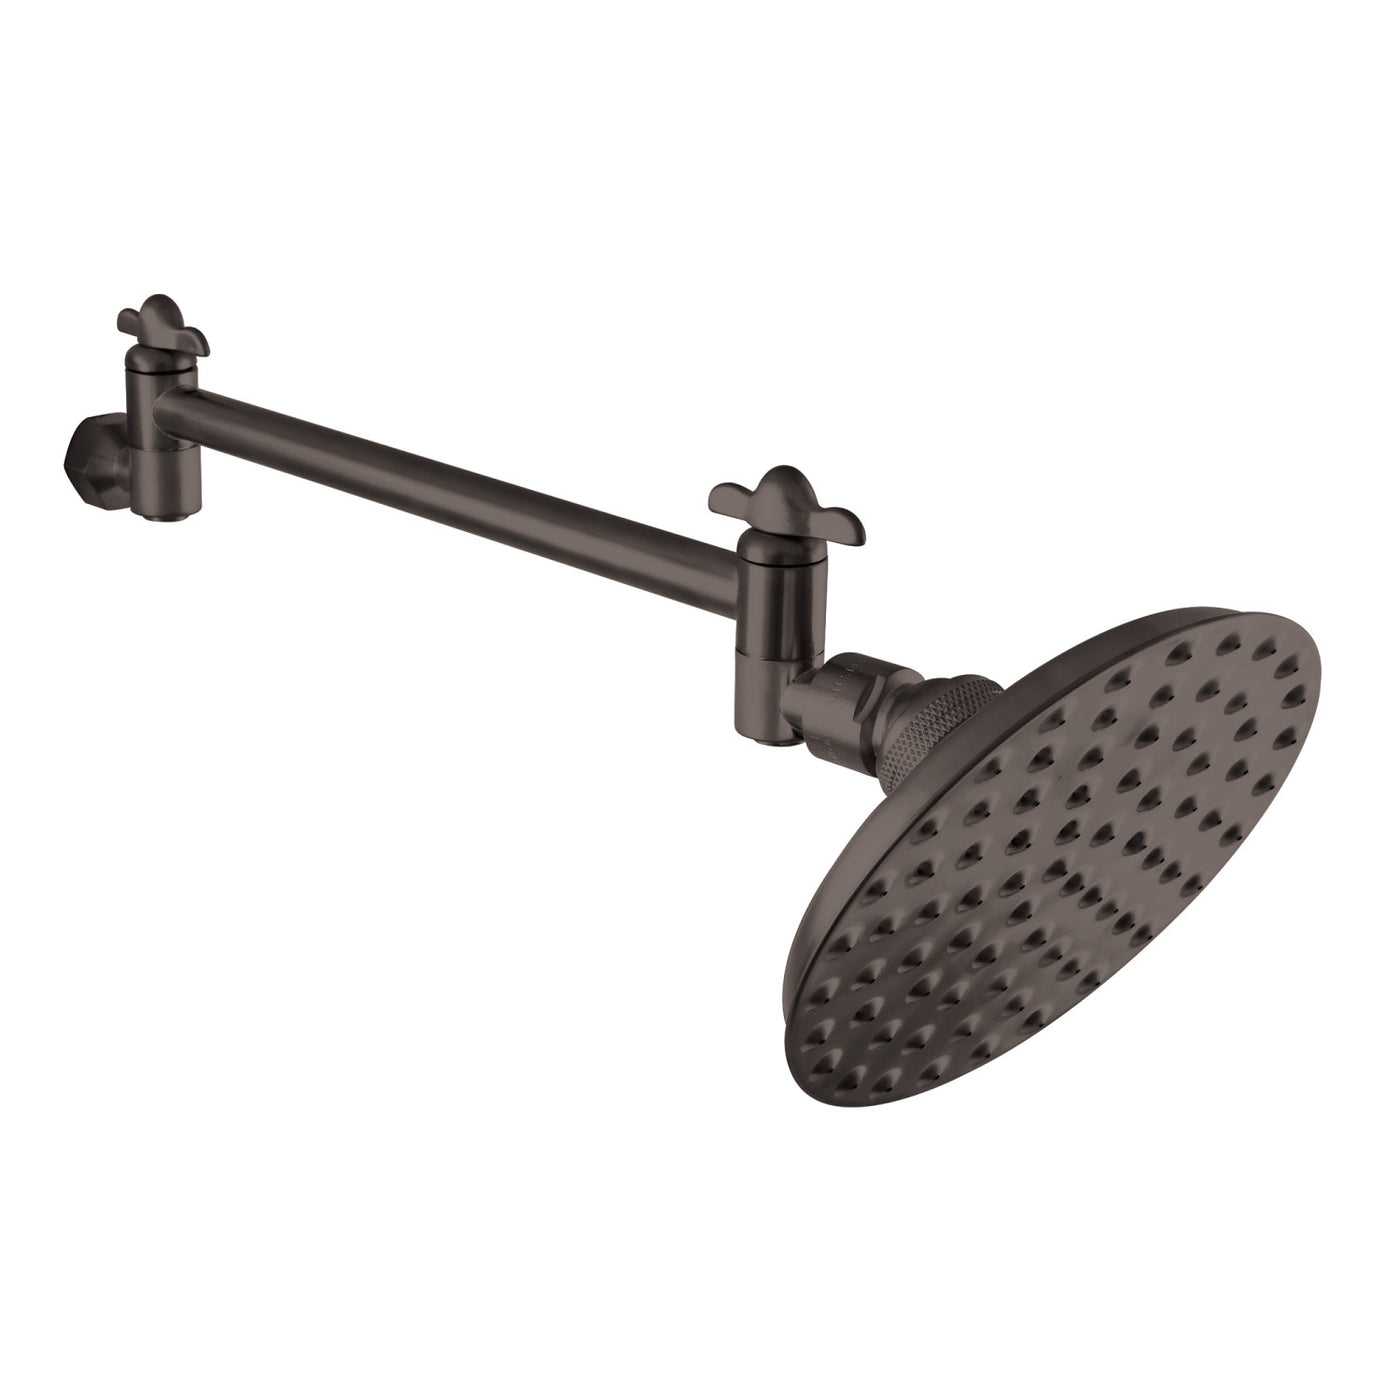 Elements of Design DK13525 5-1/4 Inch OD Showerhead with 10-Inch Shower Arm, Oil Rubbed Bronze